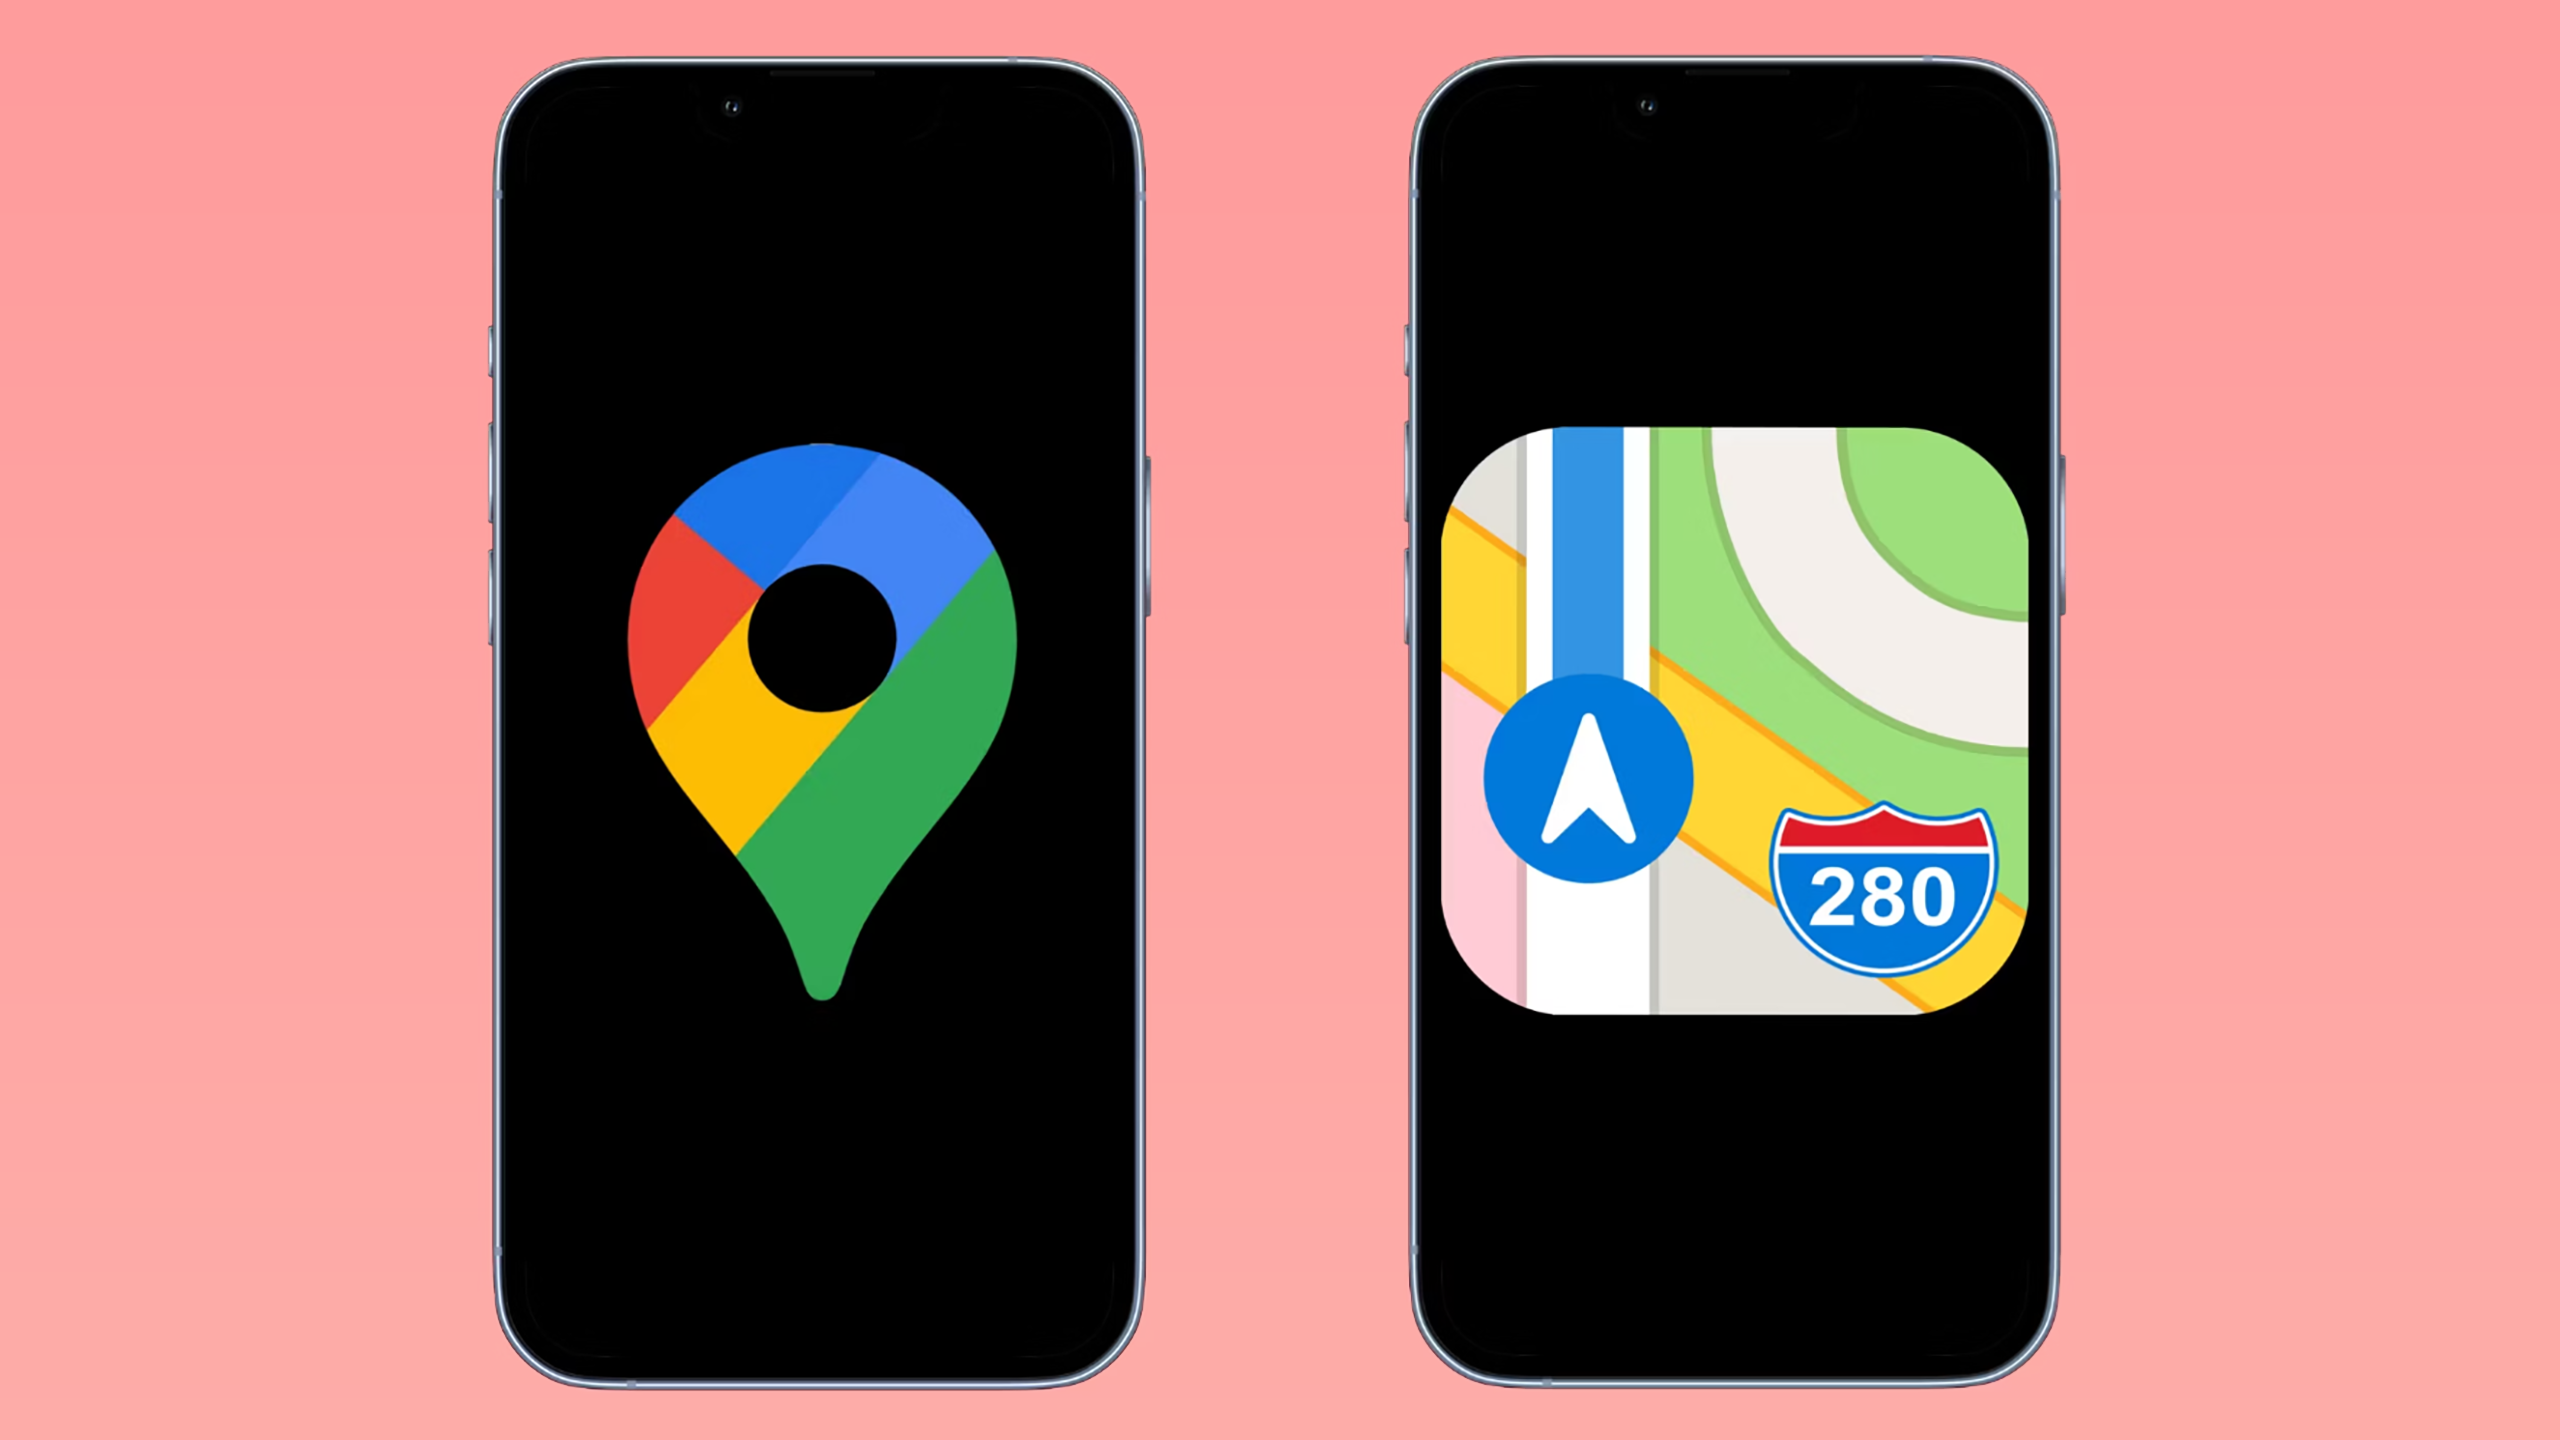 Should you use Google Maps or Apple Maps?